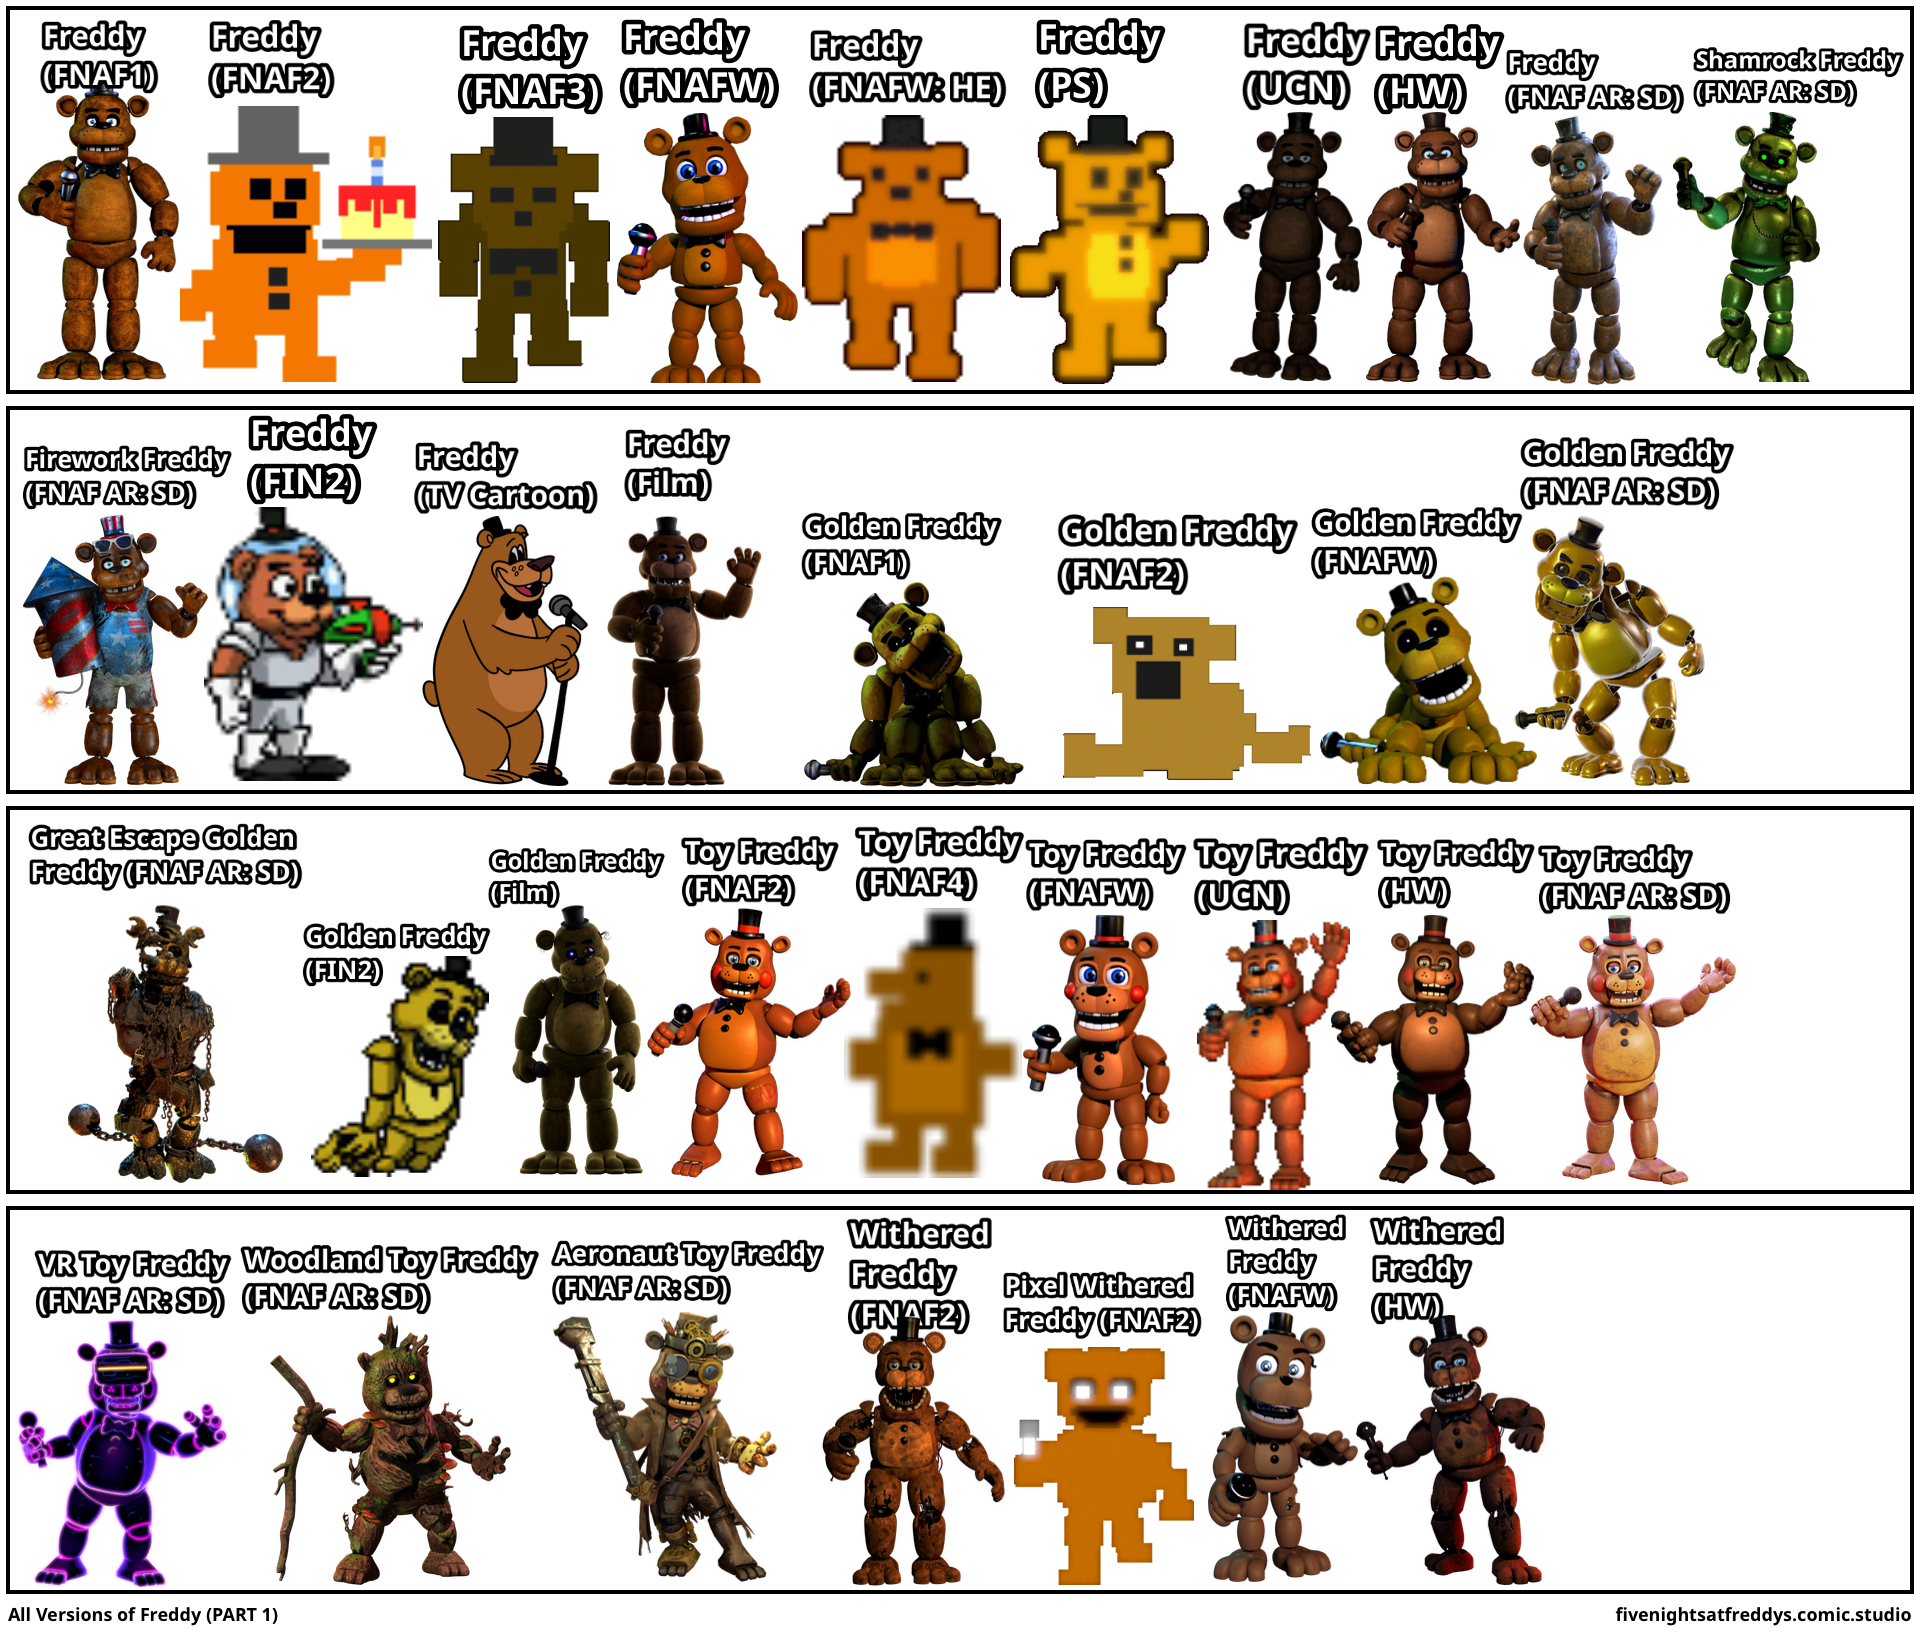 All Versions of Freddy (PART 1)